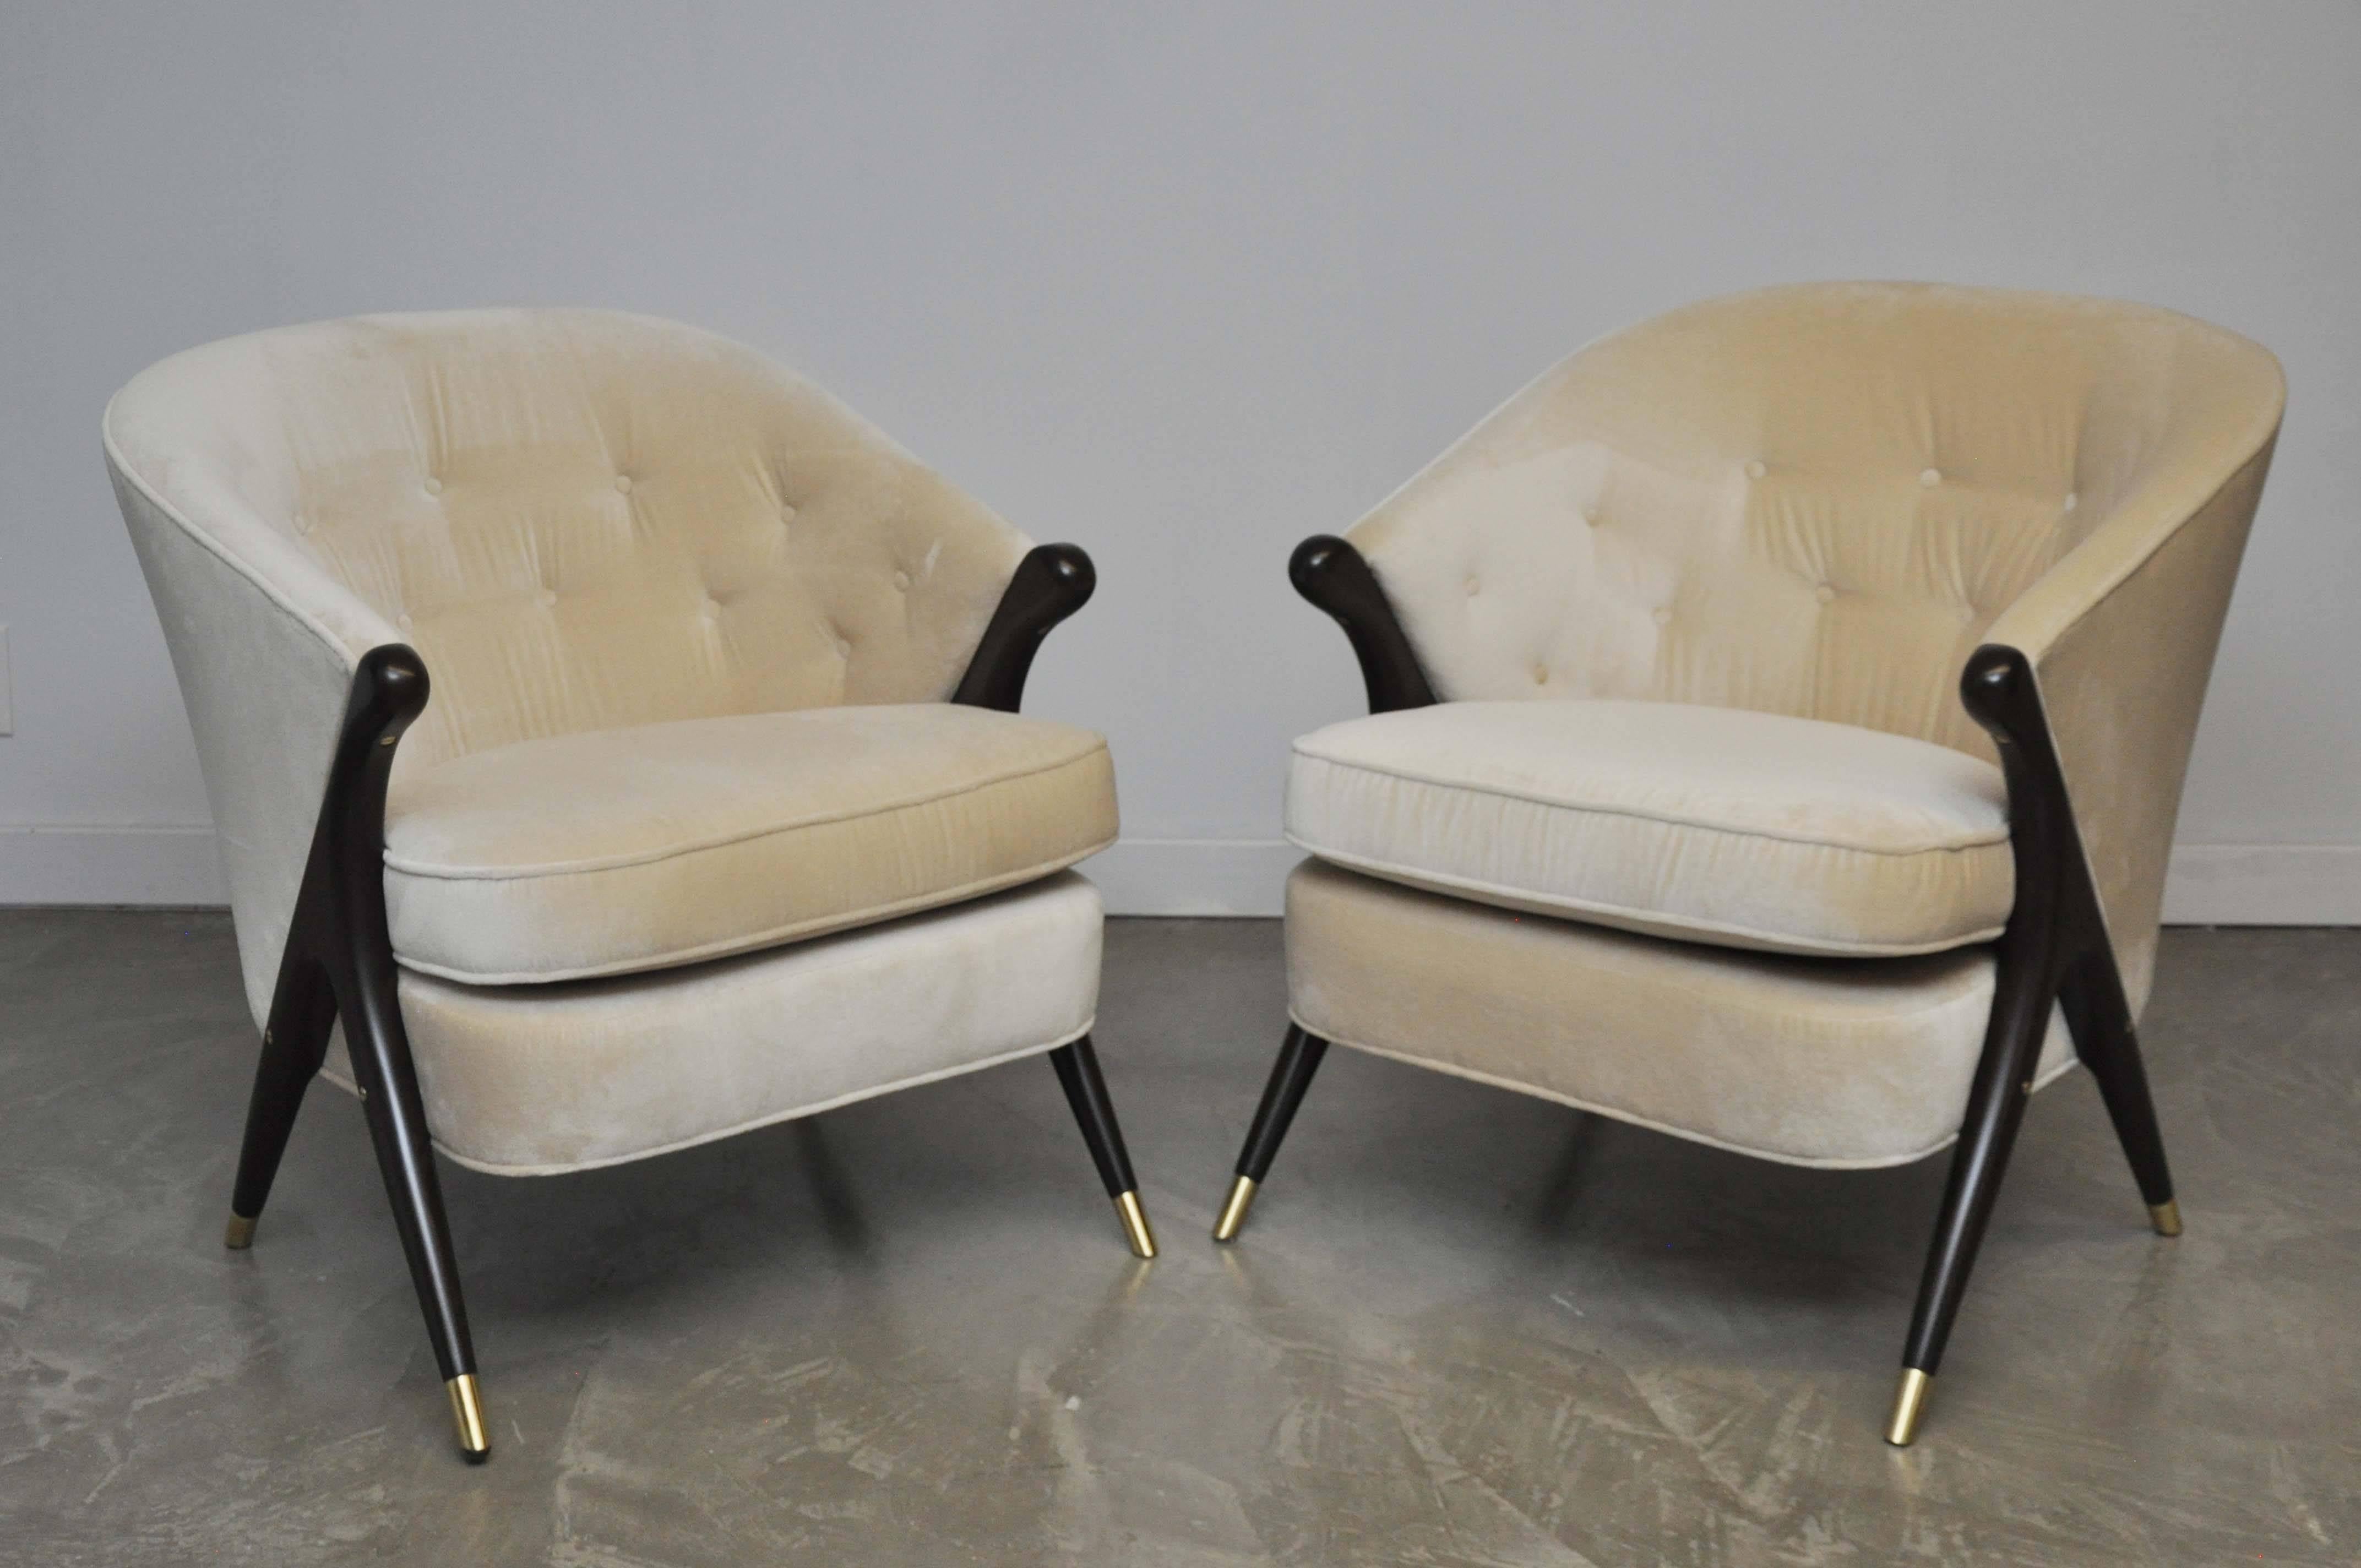 Pair of scissor chairs by Karpen. Fully restored. Refinished frames in dark espresso tone with brass details. New silk mohair upholstery.